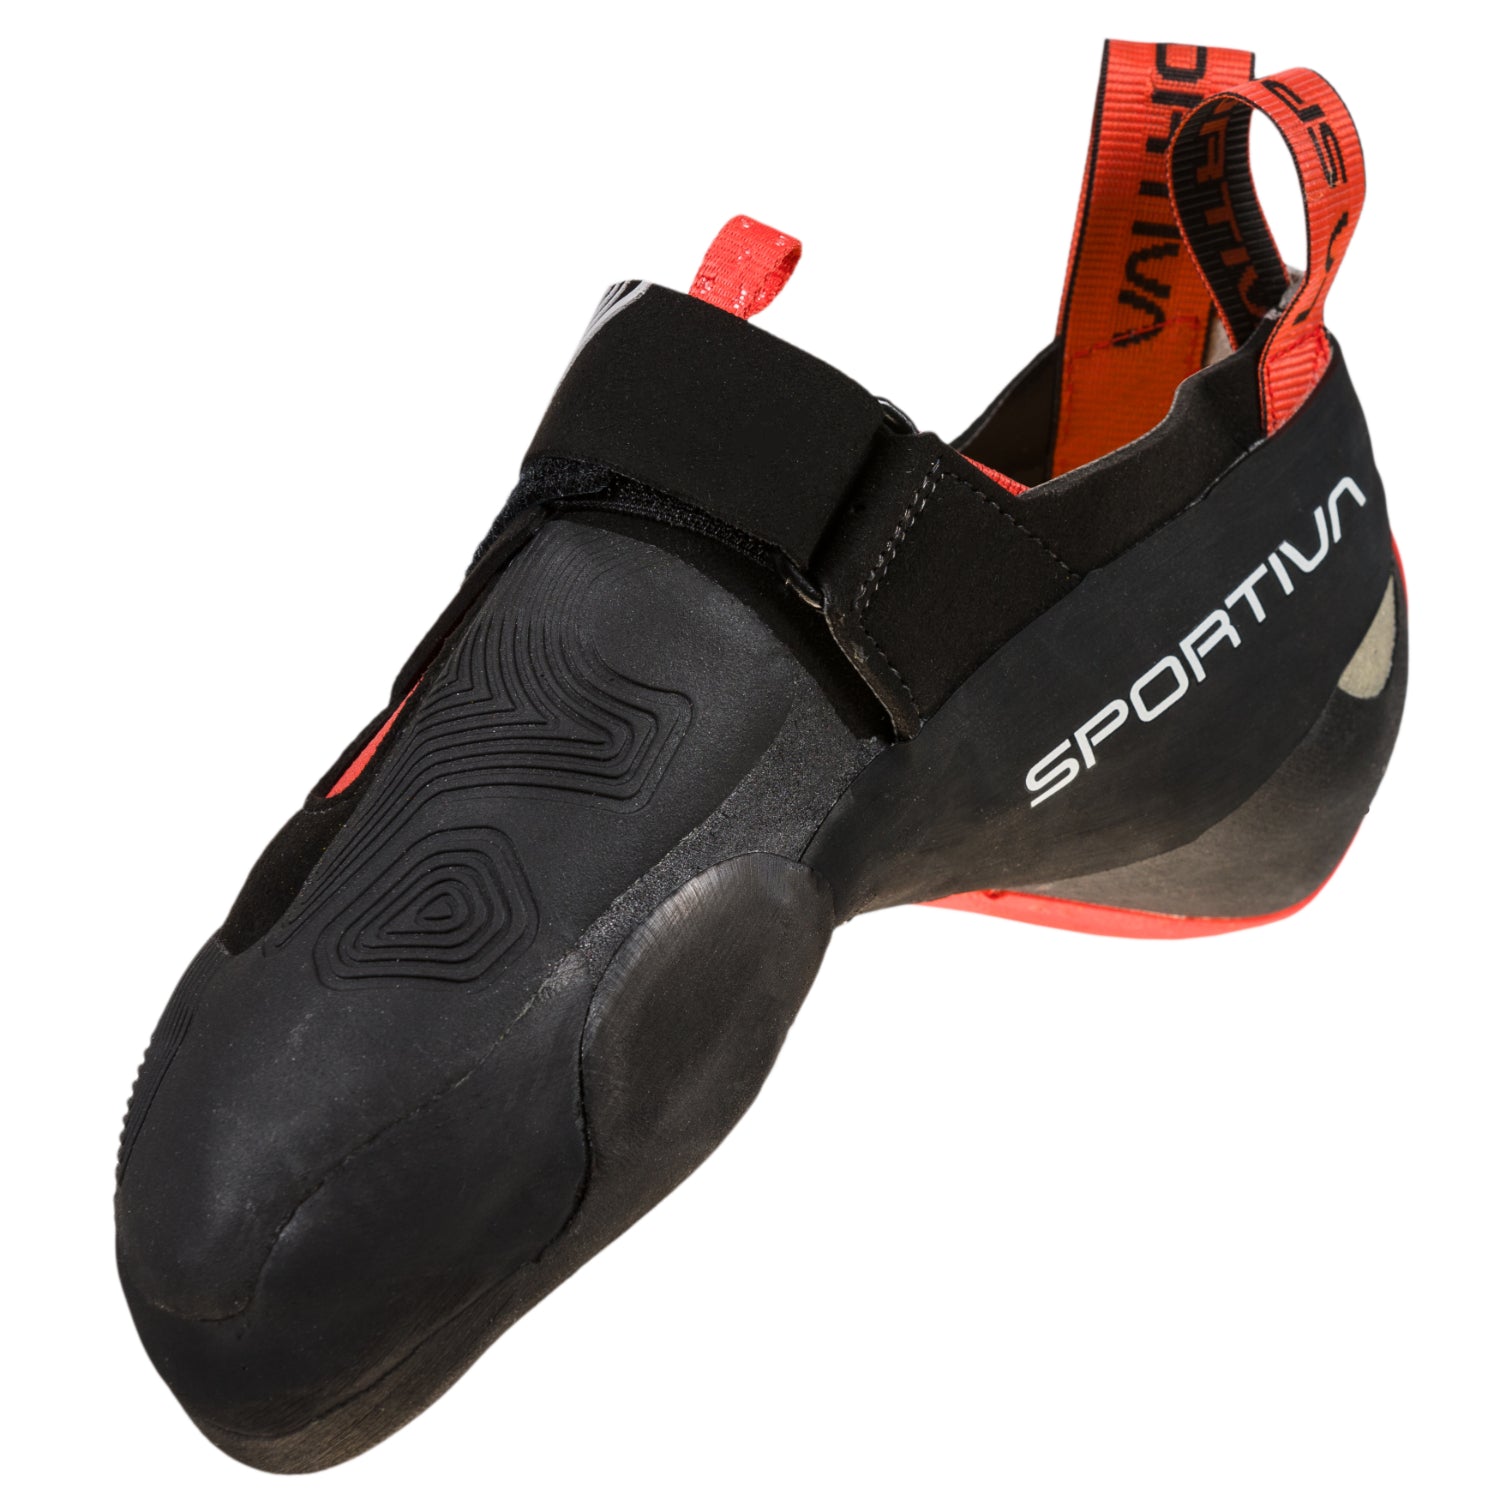 La Sportiva Theory Womens in black and red 